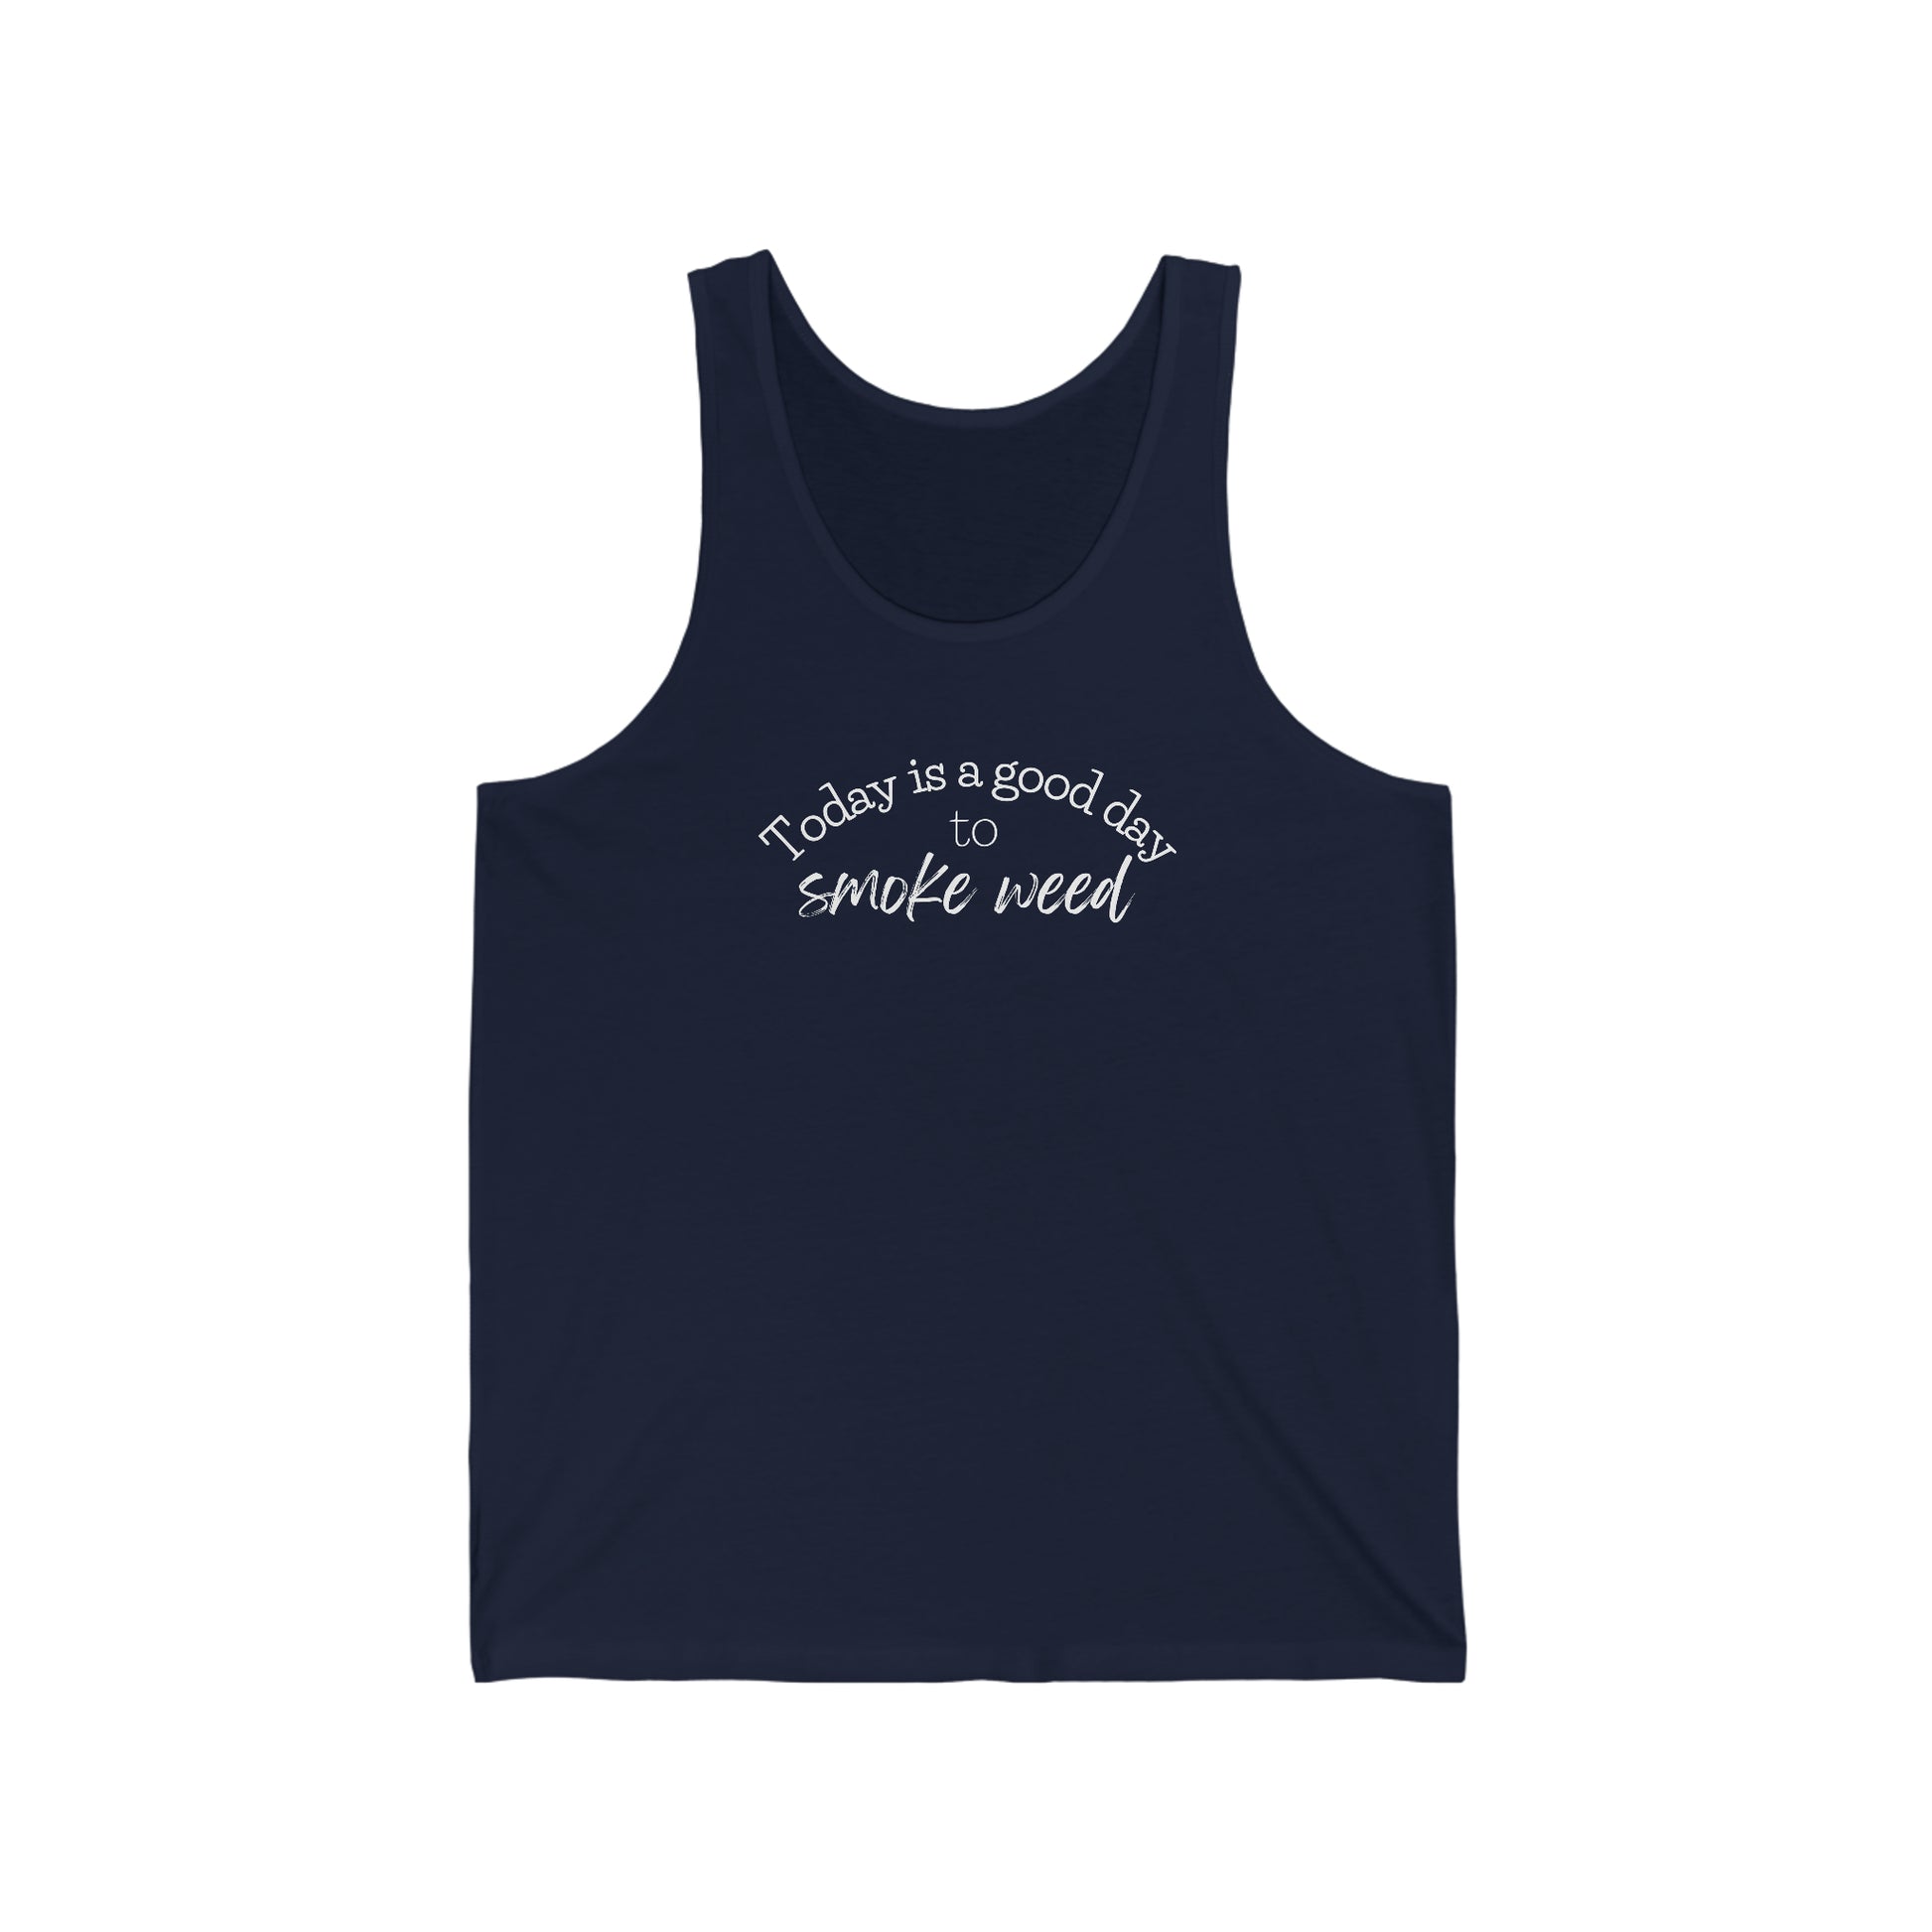 Navy unisex jersey tank top with the phrase "Today is a Good Day to Smoke Weed" Cannabis Tank Top written in cursive white font on the front.